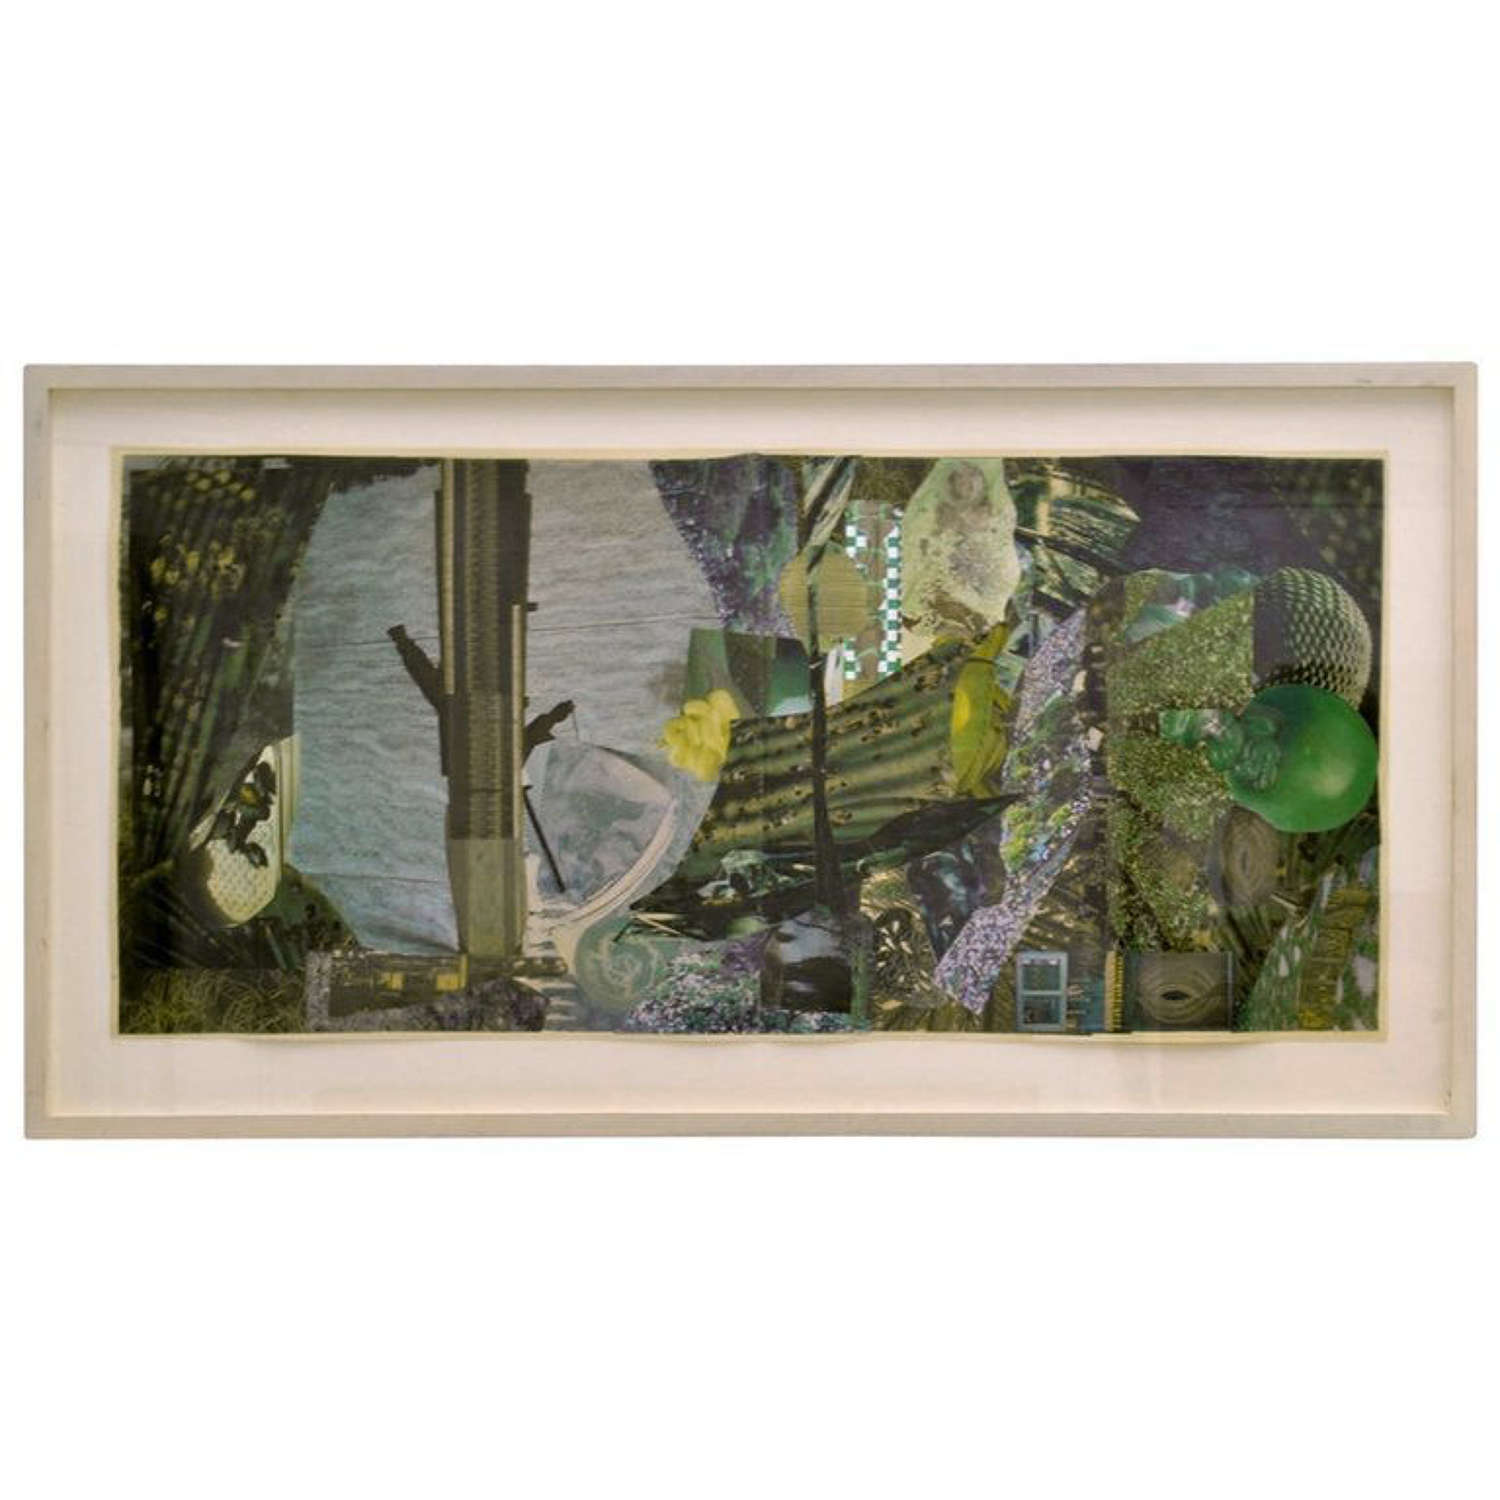 Abstract Collage Art in Green by B Allan, UK, 1993